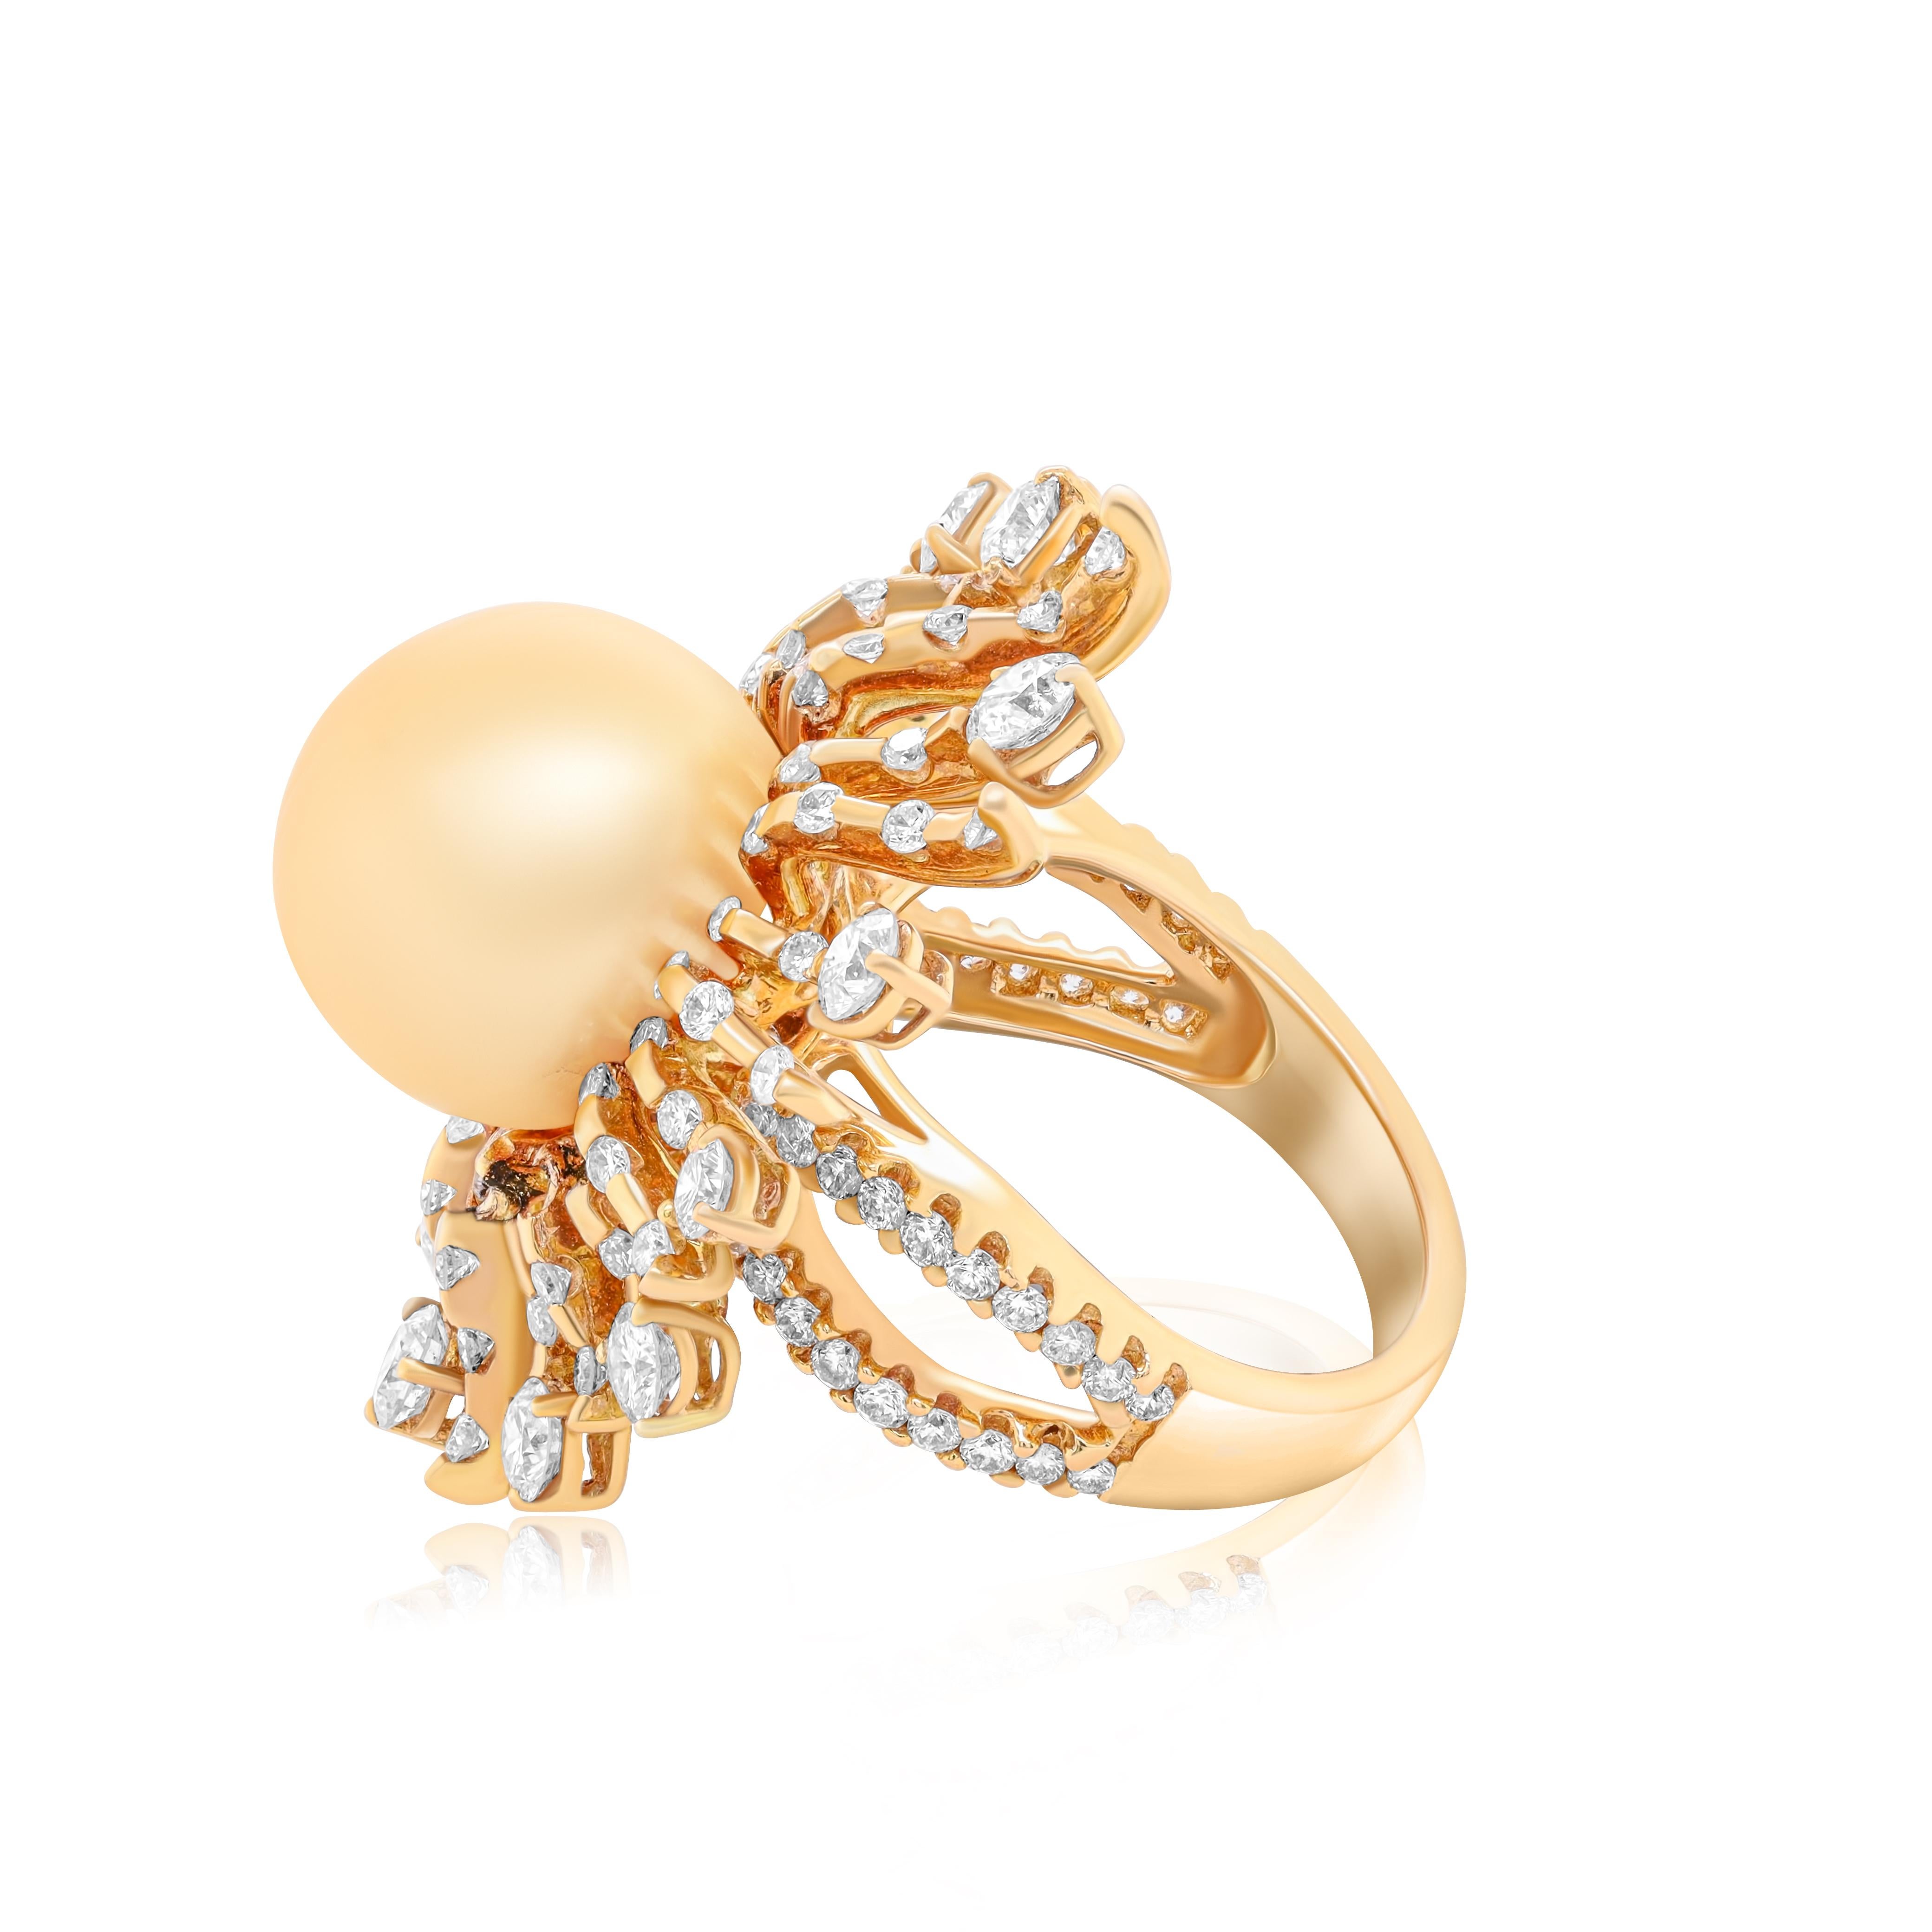 18 kt yellow gold diamond and pearl ring featuring a 13.5 mm yellow pearl surrounded by 3.05 cts tw of round diamonds in a sun-like design.
Diana M. is a leading supplier of top-quality fine jewelry for over 35 years.
Diana M is one-stop shop for